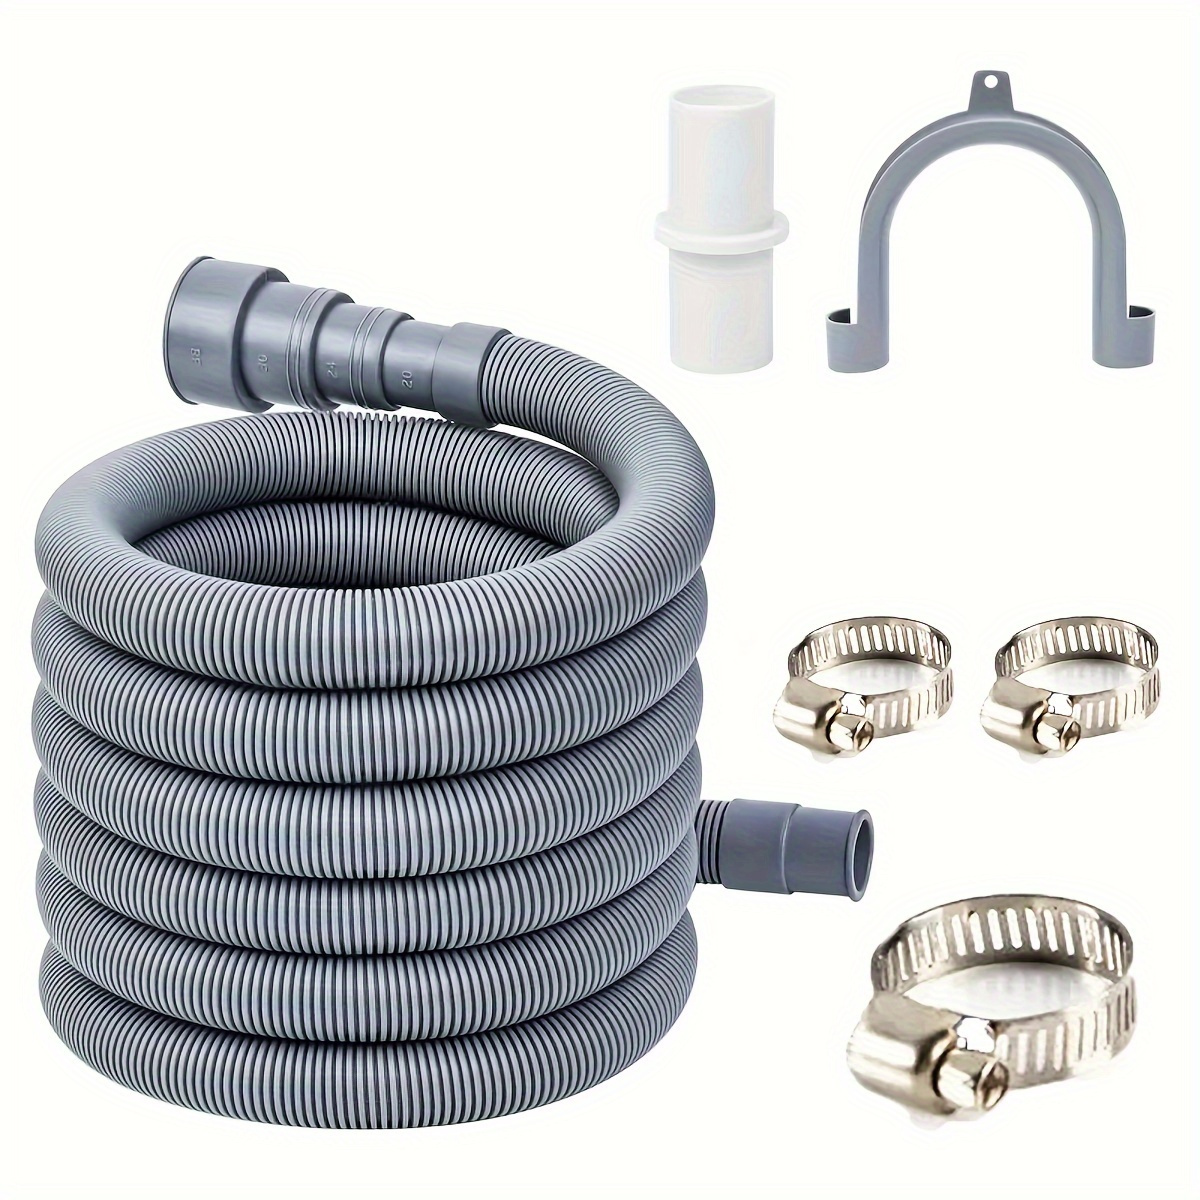 

1pc Washing Machine And Dishwasher Drain Pipe Kit, Including Flexible Corrugated Hose, Extension Adapter And Hose Clamp